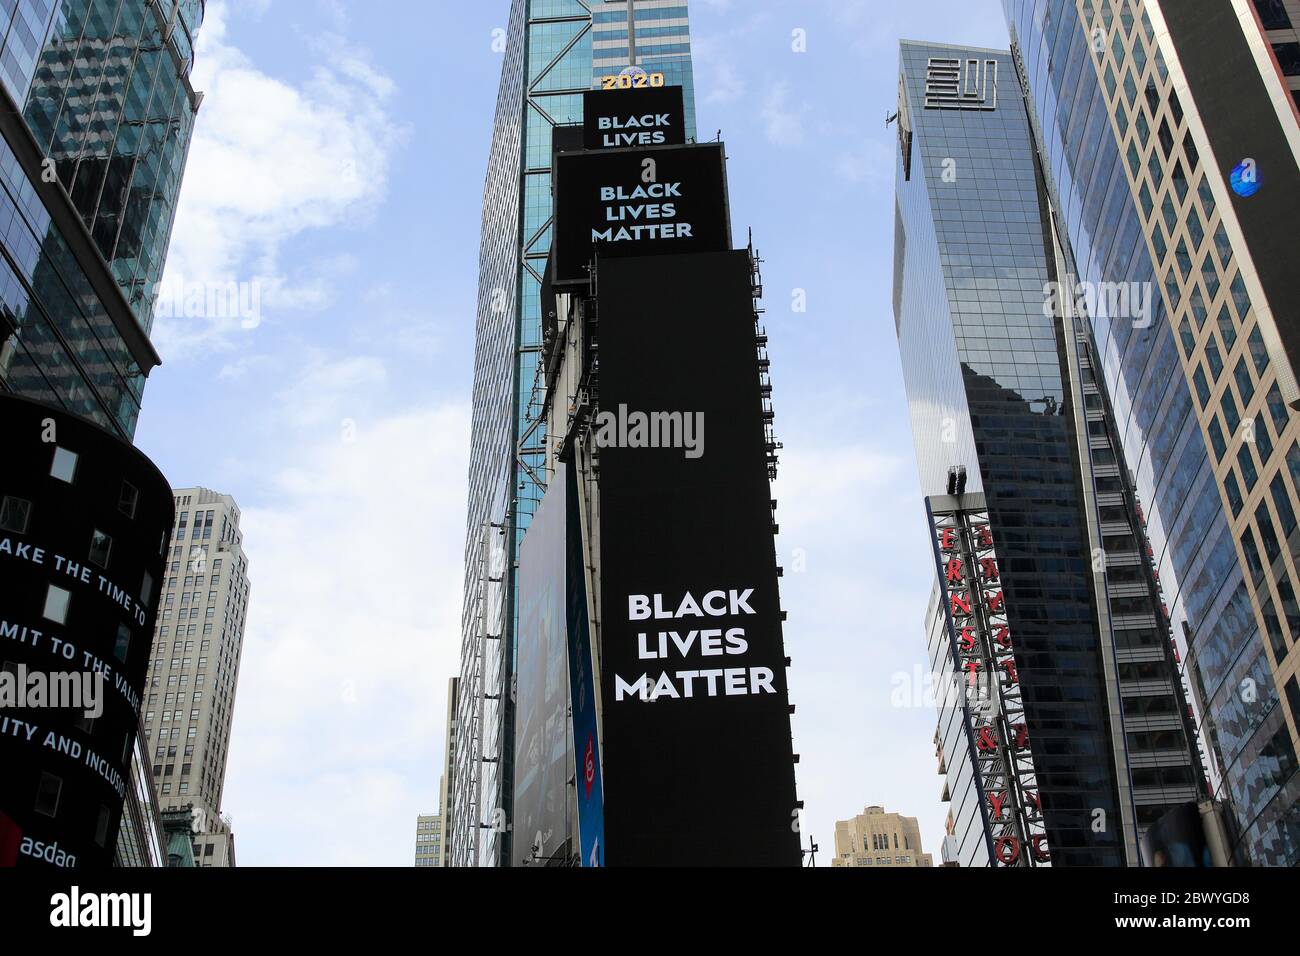 Black Lives Matter billboard in Times Square. The death of George Floyd while in the custody of Minneapolis police has prompted nationwide protests around the United States demanding justice and social change. 1 Times Square, Manhattan, New York City USA. June 2, 2020 Stock Photo